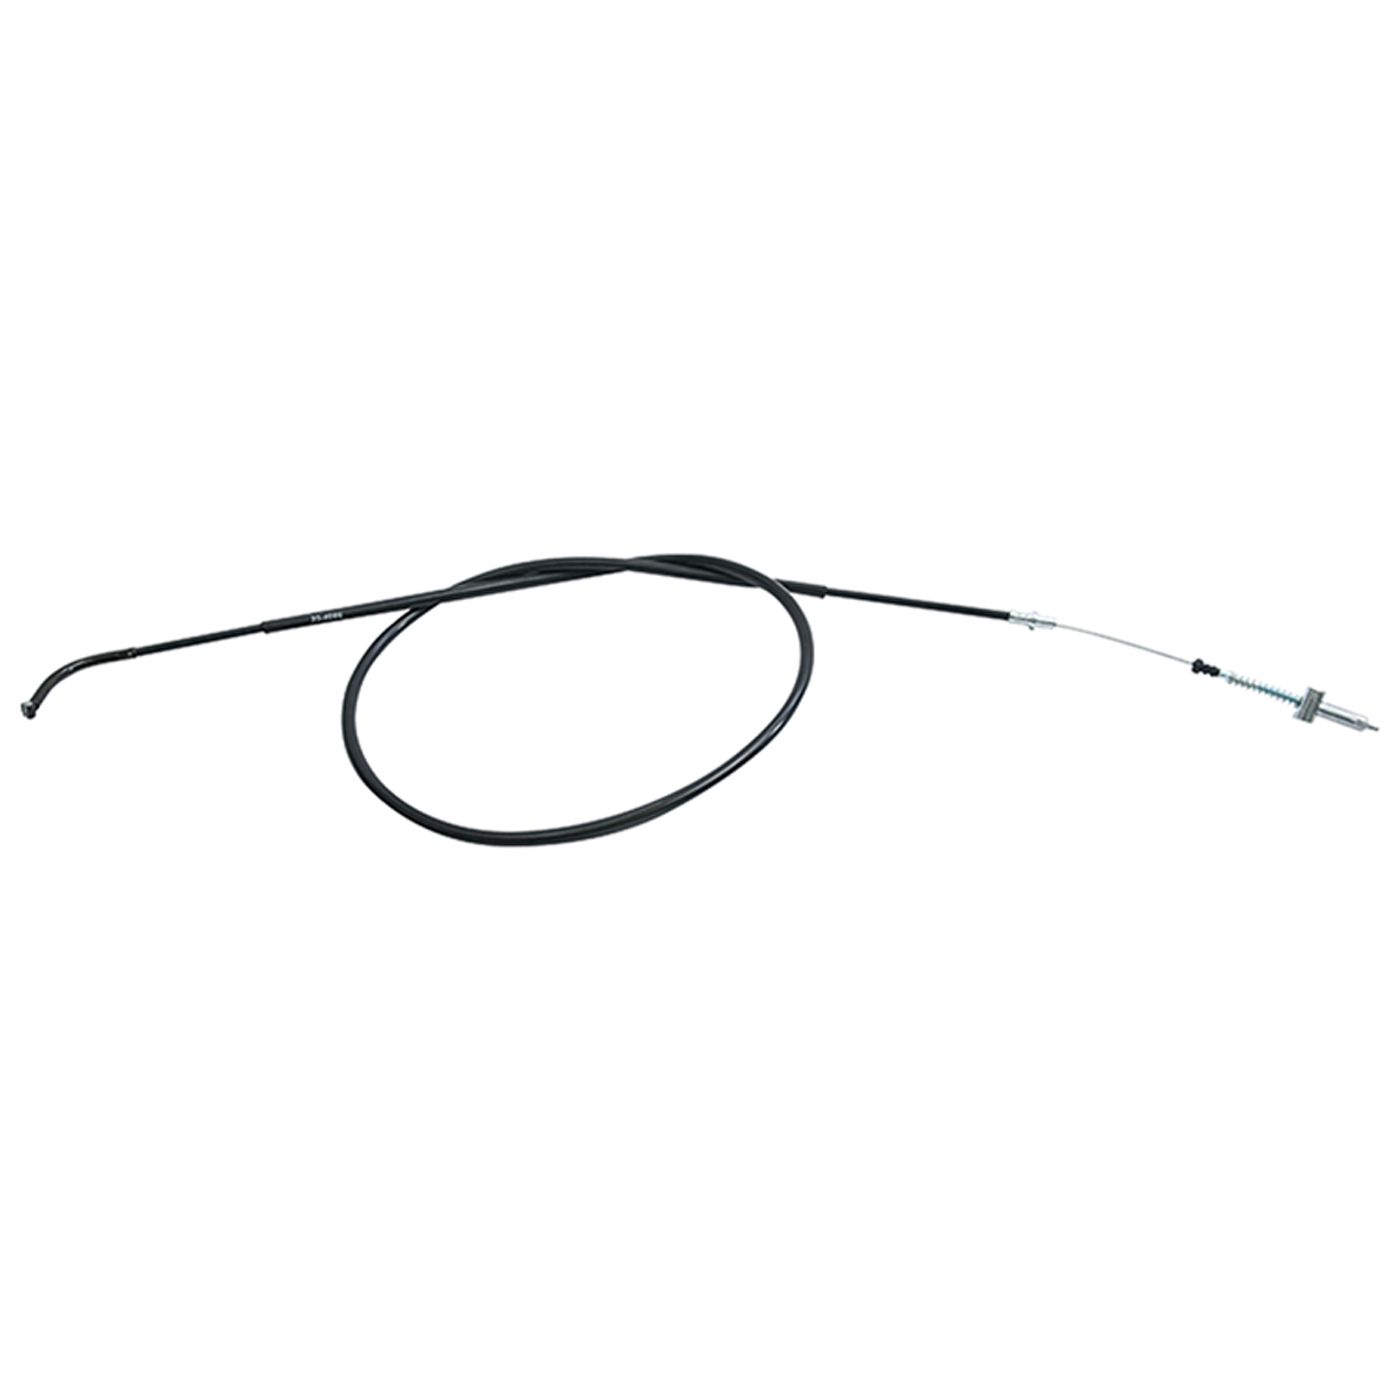 Wrp Brake Cables - WRP454048 image